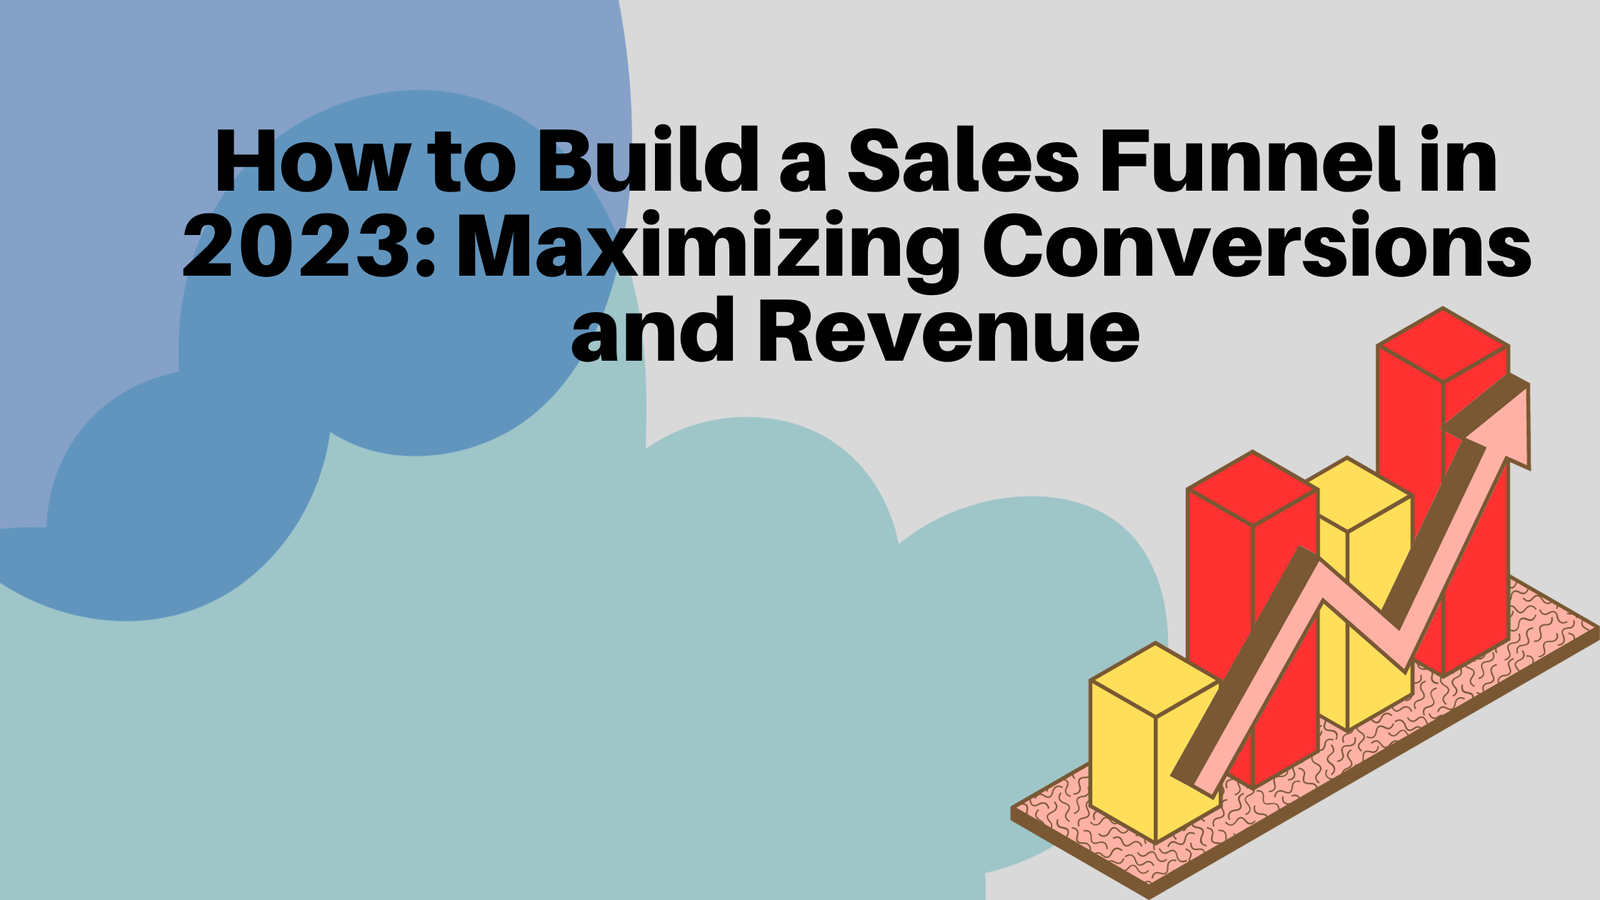 How to Build a Sales Funnel in 2023: Maximizing Conversions and Revenue